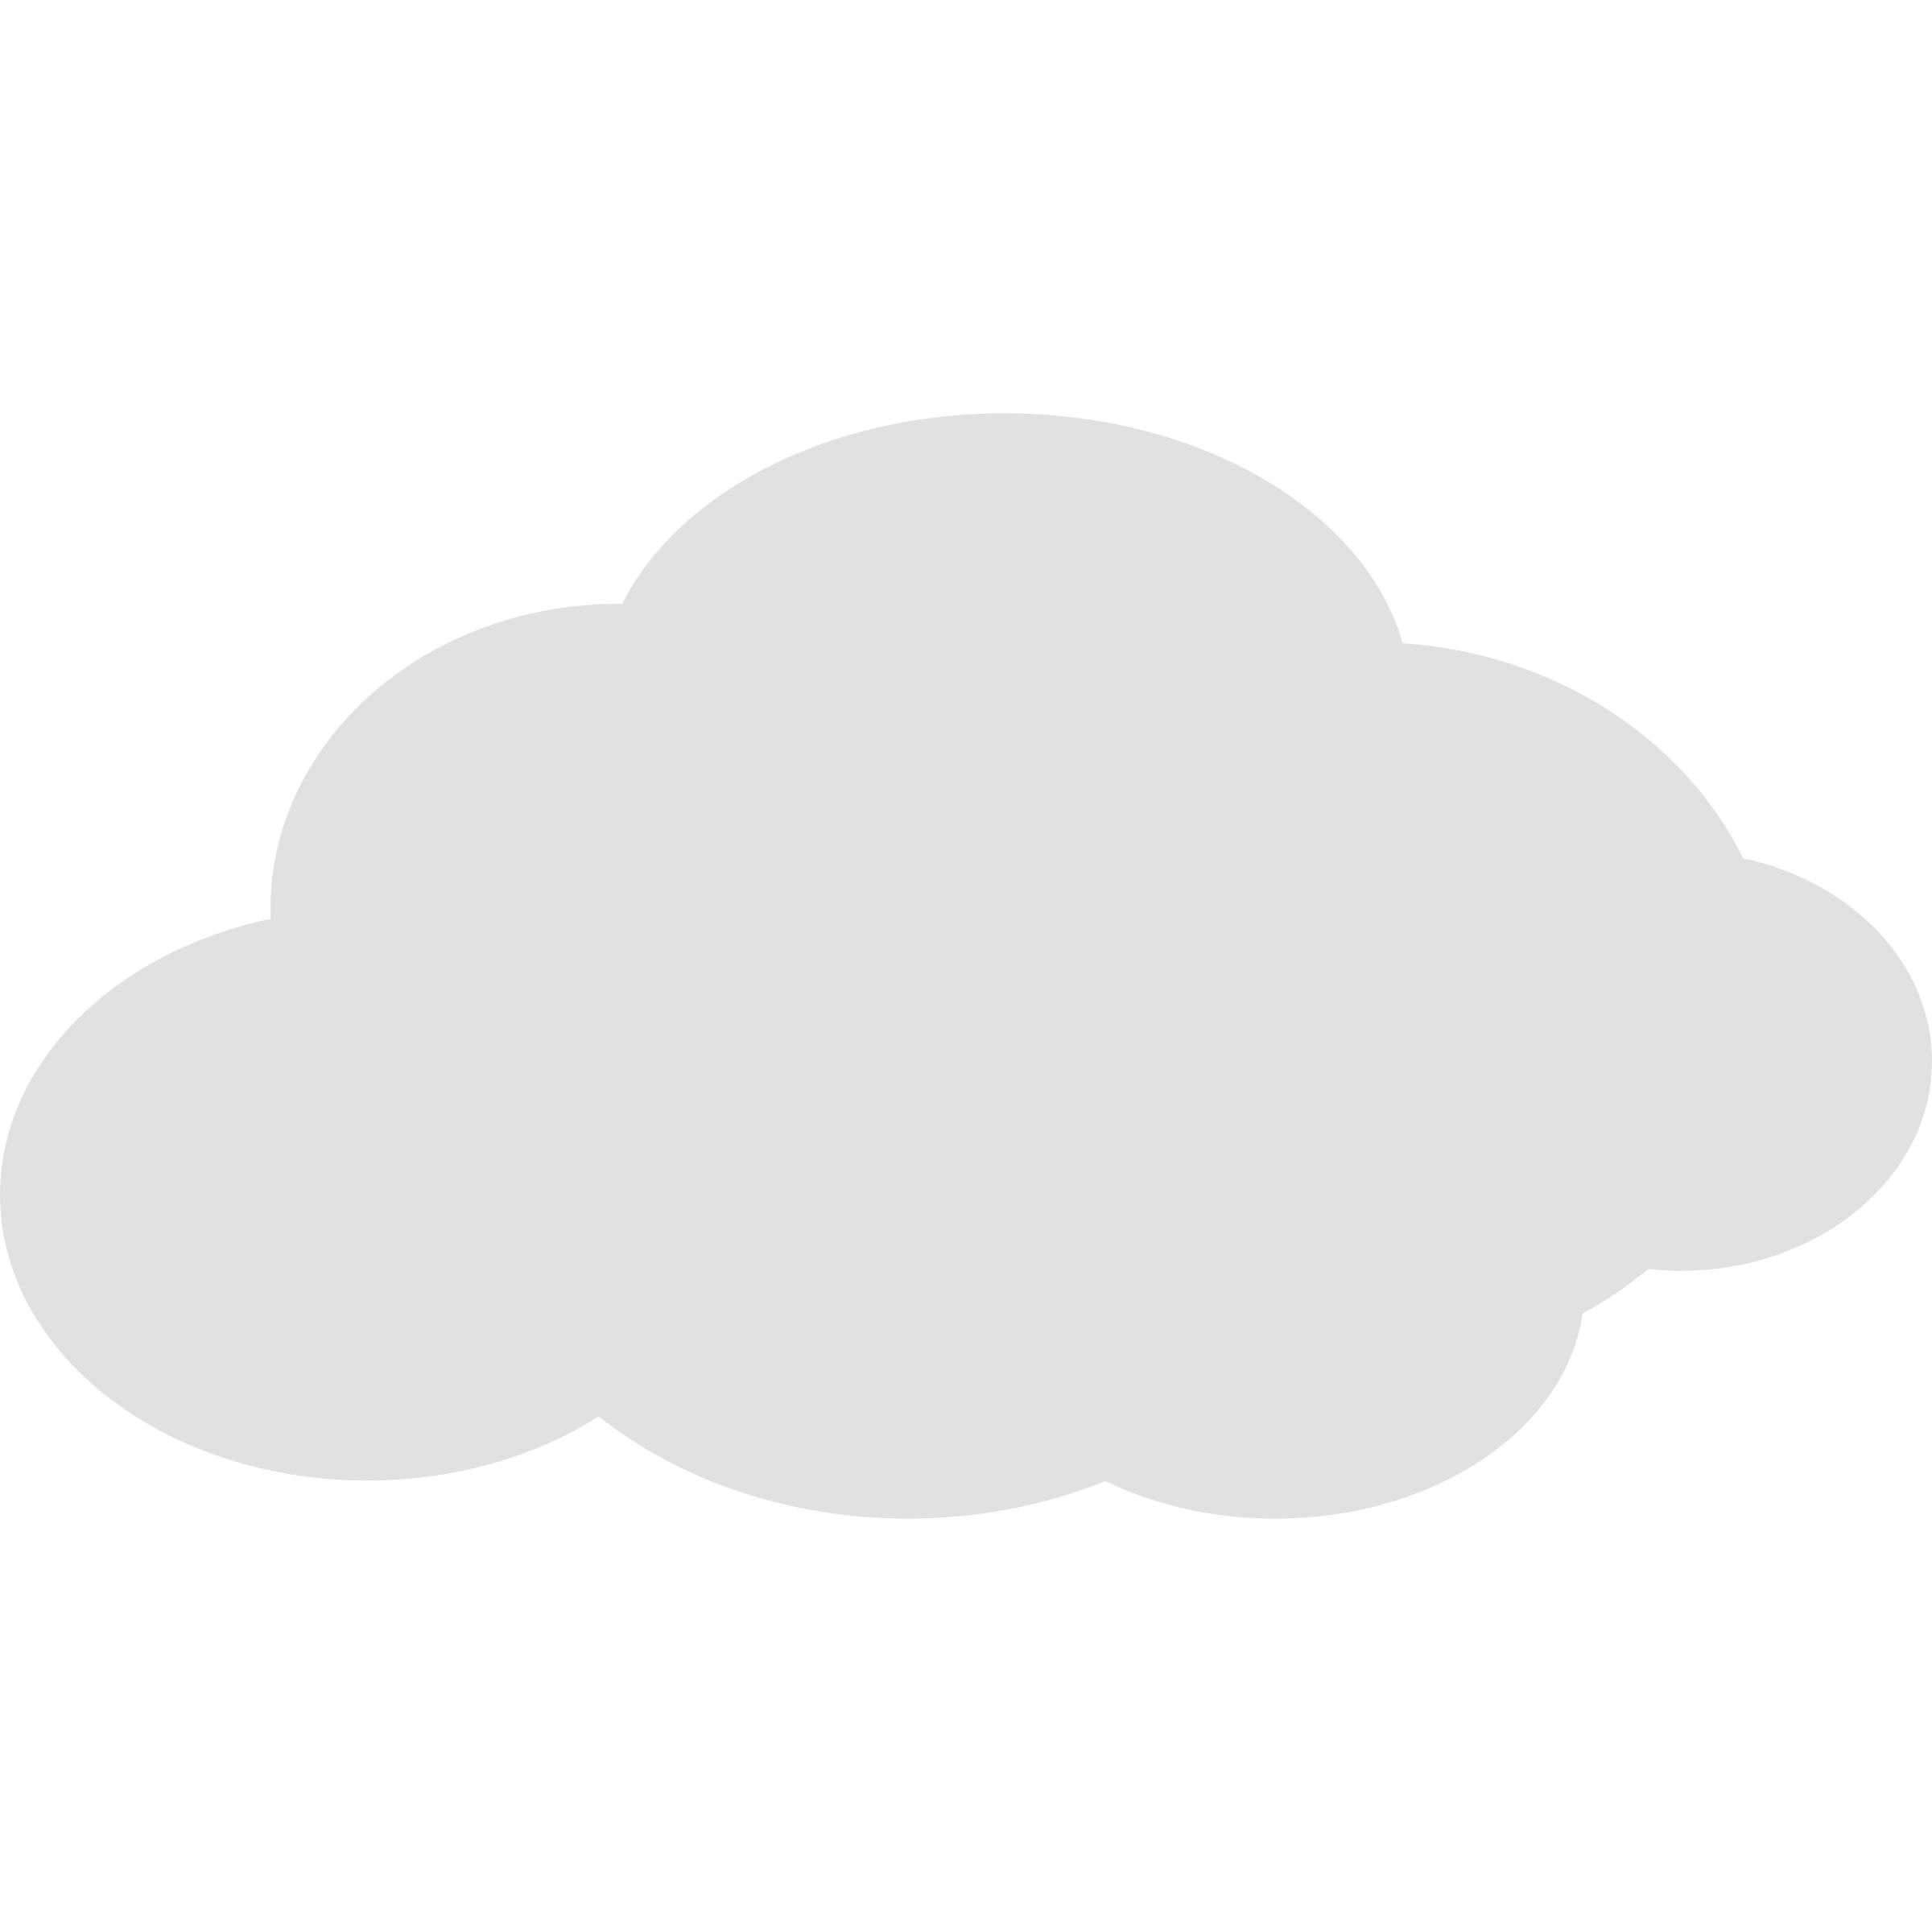 Cloud clipart free image 6 3